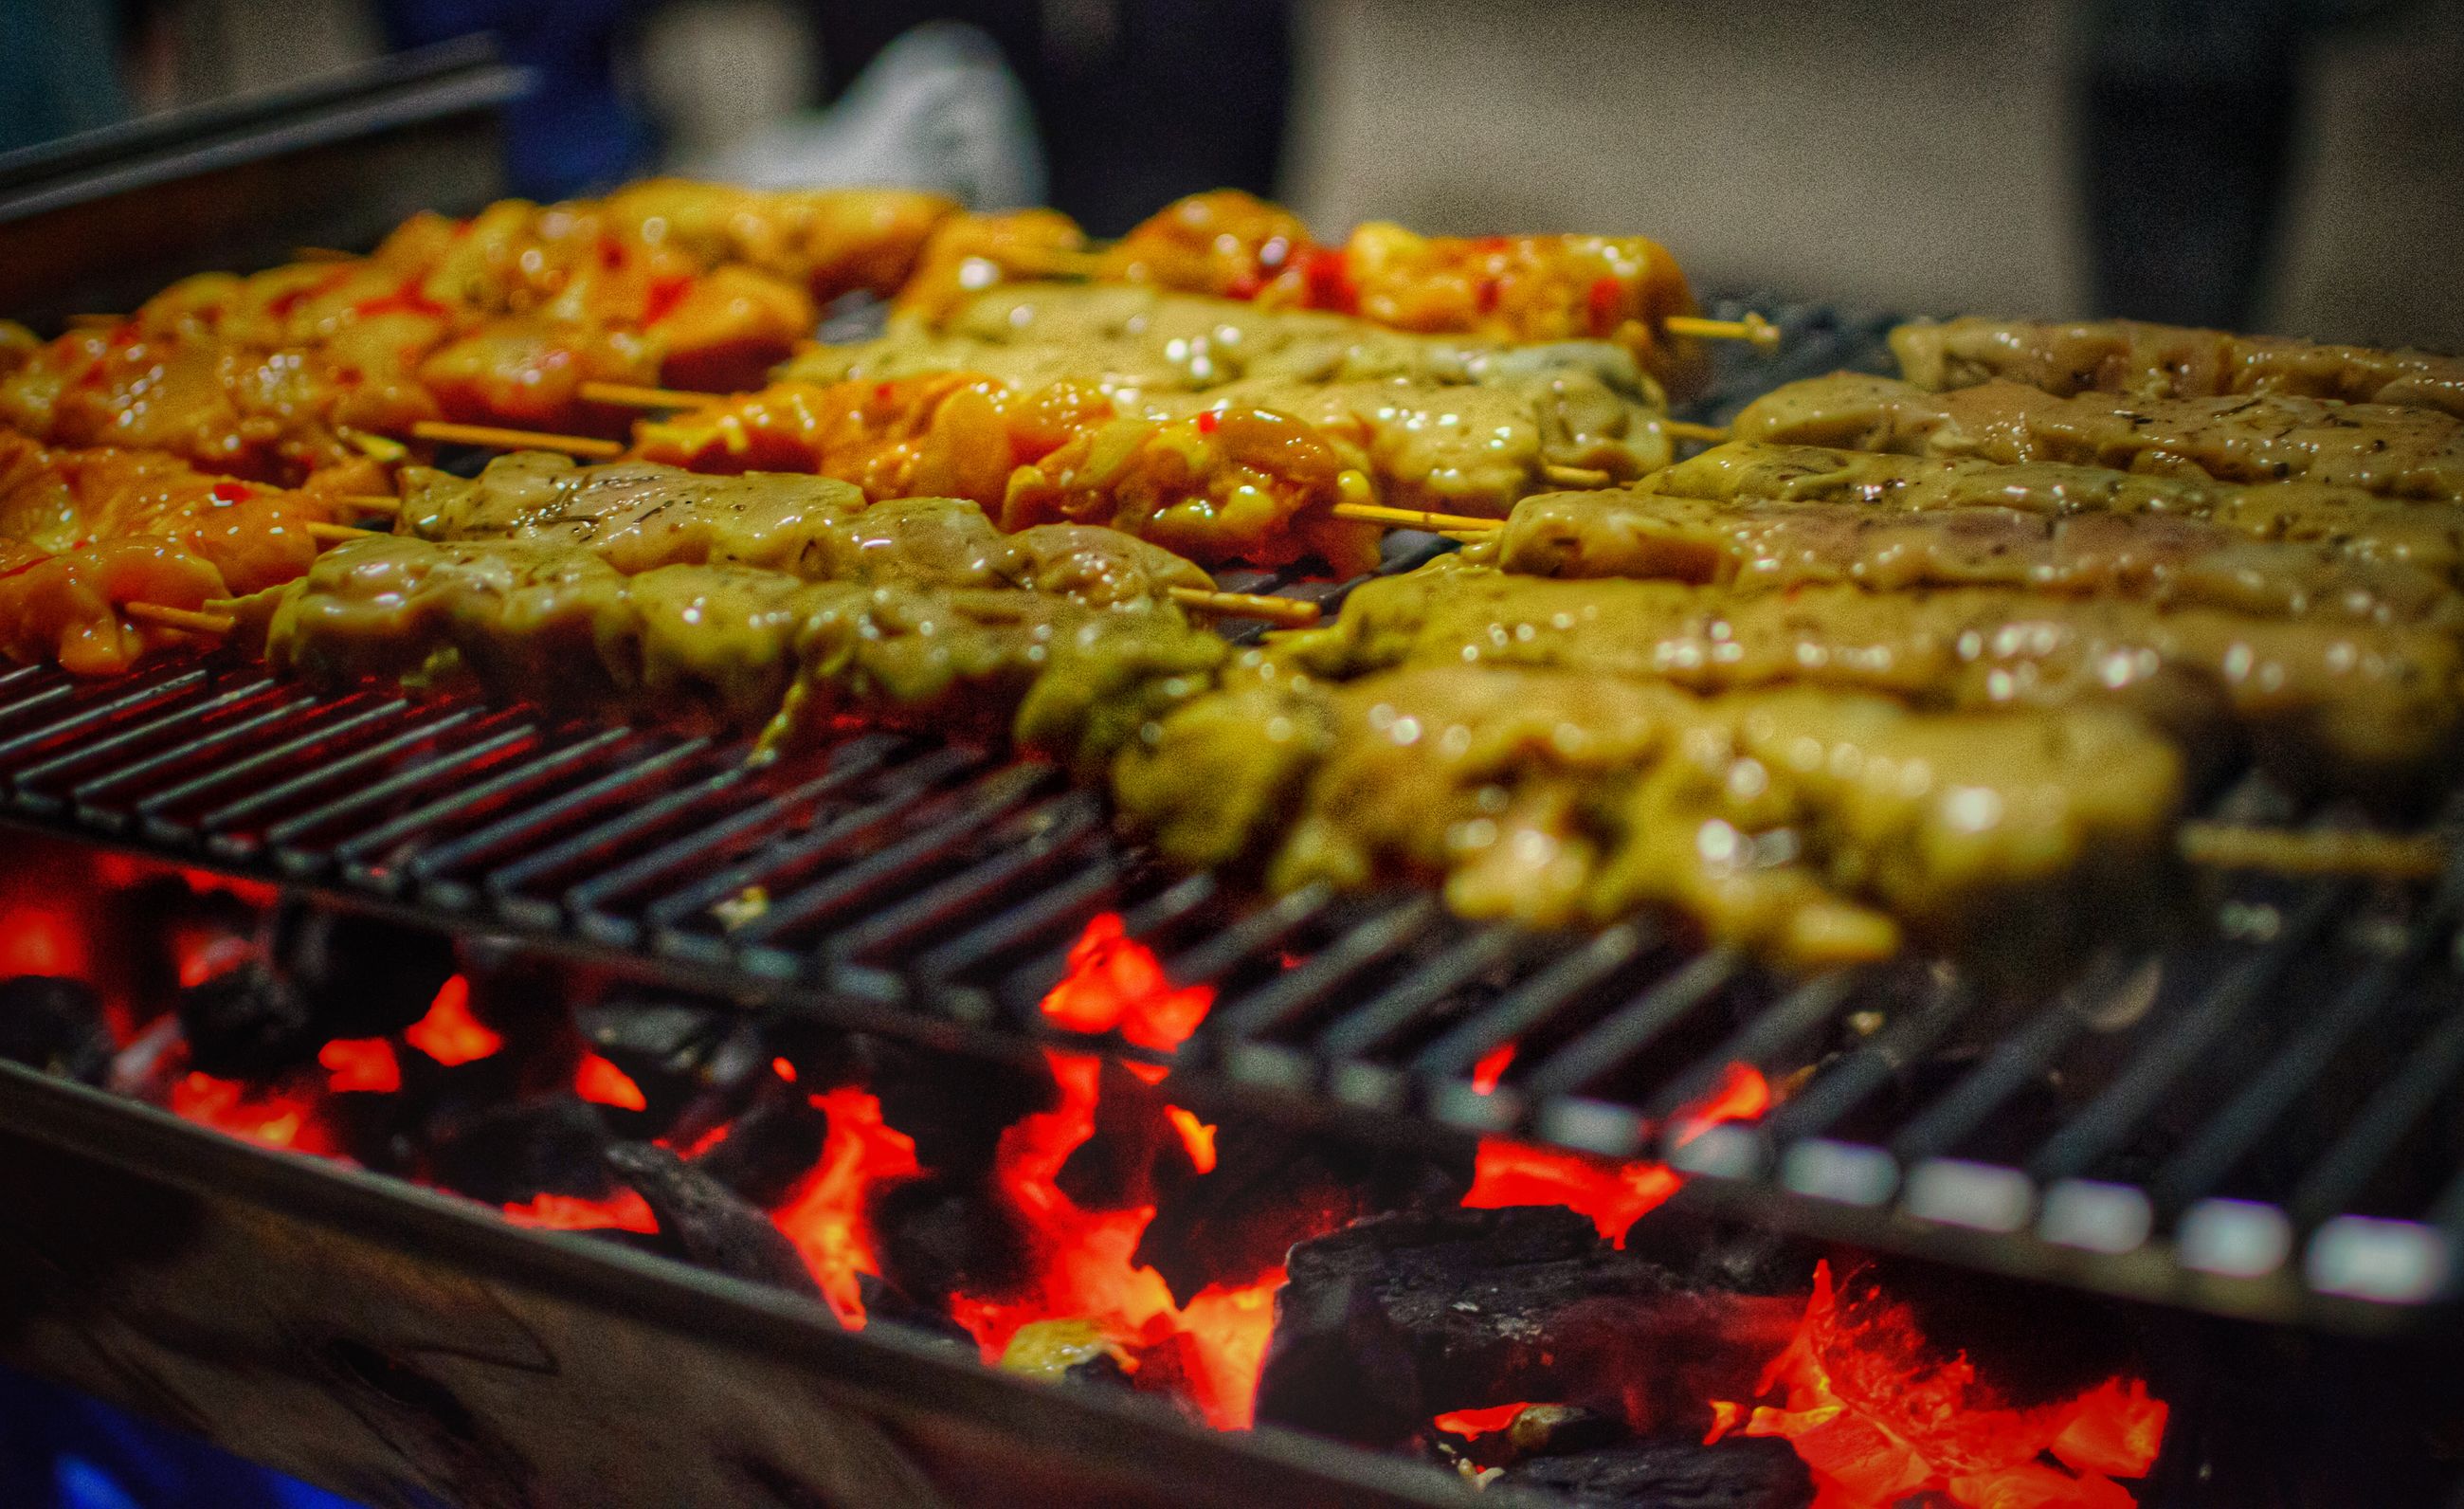 indoors, food and drink, food, freshness, still life, close-up, heat - temperature, meat, ready-to-eat, grilled, preparation, barbecue grill, cooking, selective focus, flame, indulgence, meal, barbecue, focus on foreground, unhealthy eating